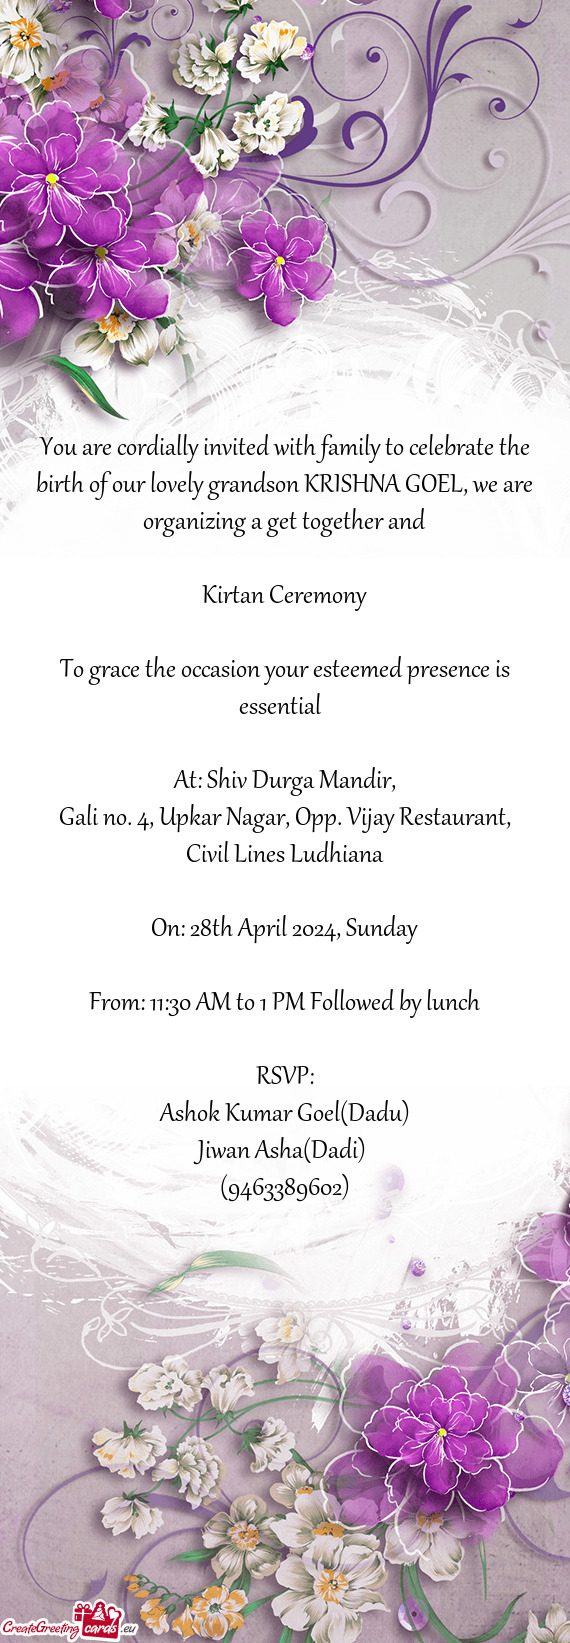 To grace the occasion your esteemed presence is essential